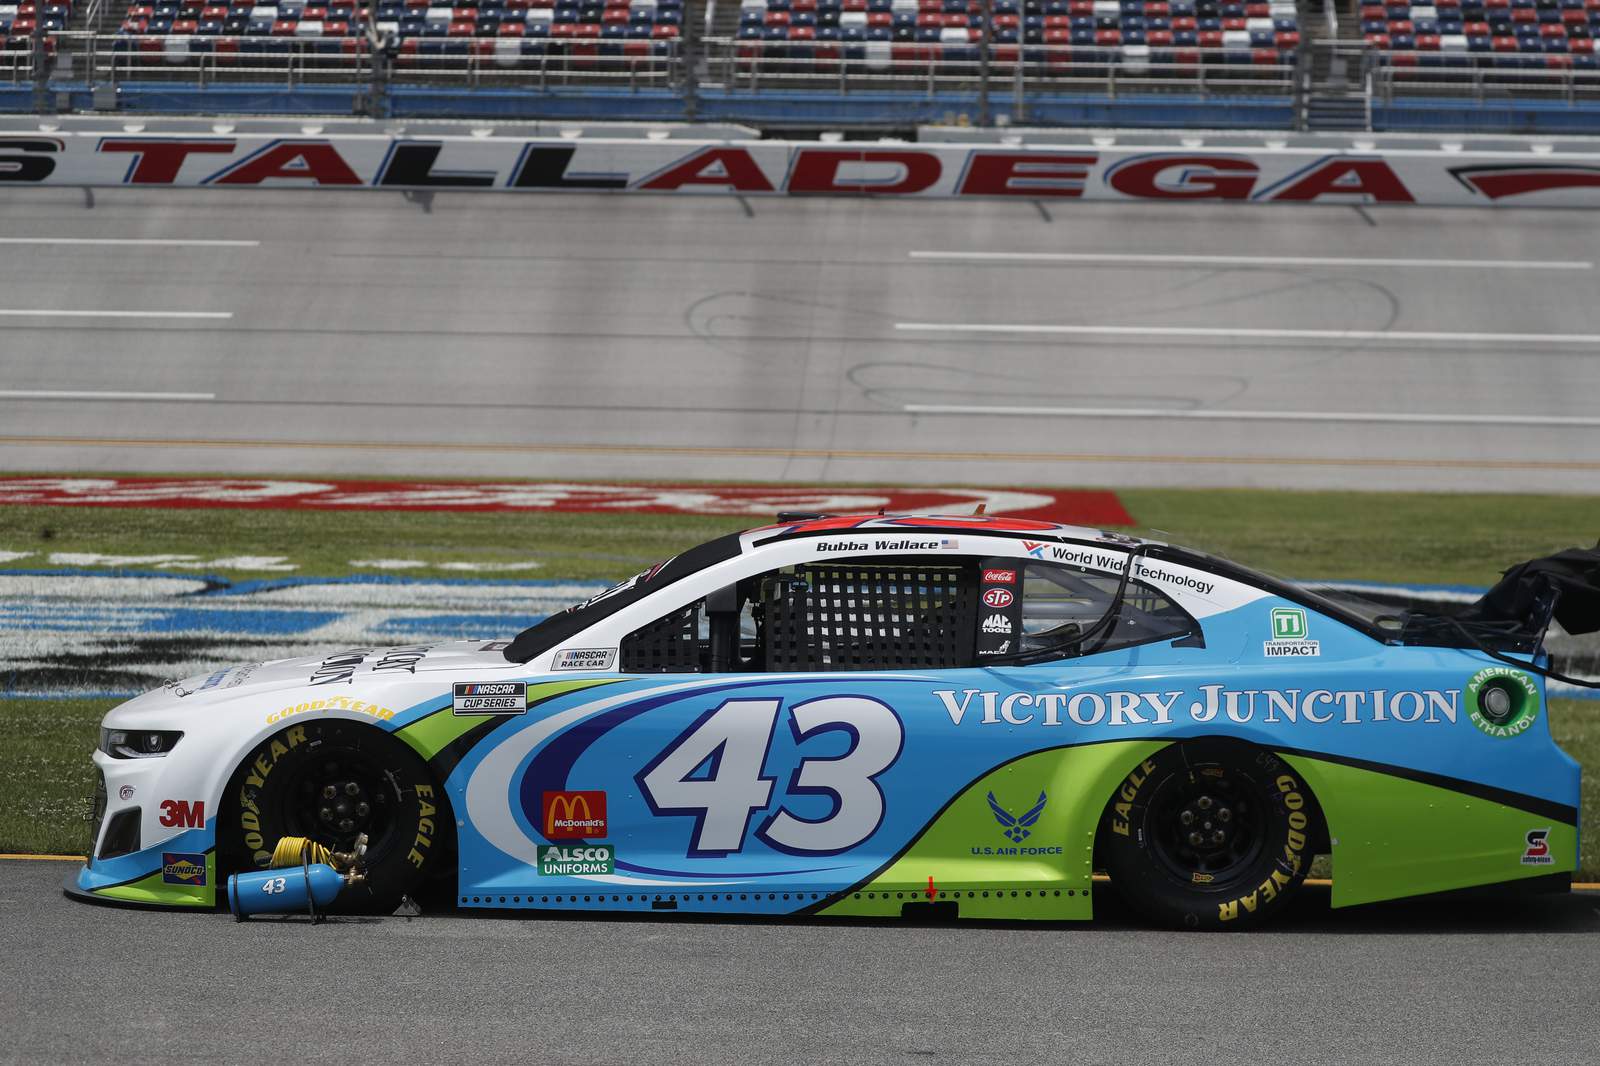 NASCAR race begins after show of support for Bubba Wallace